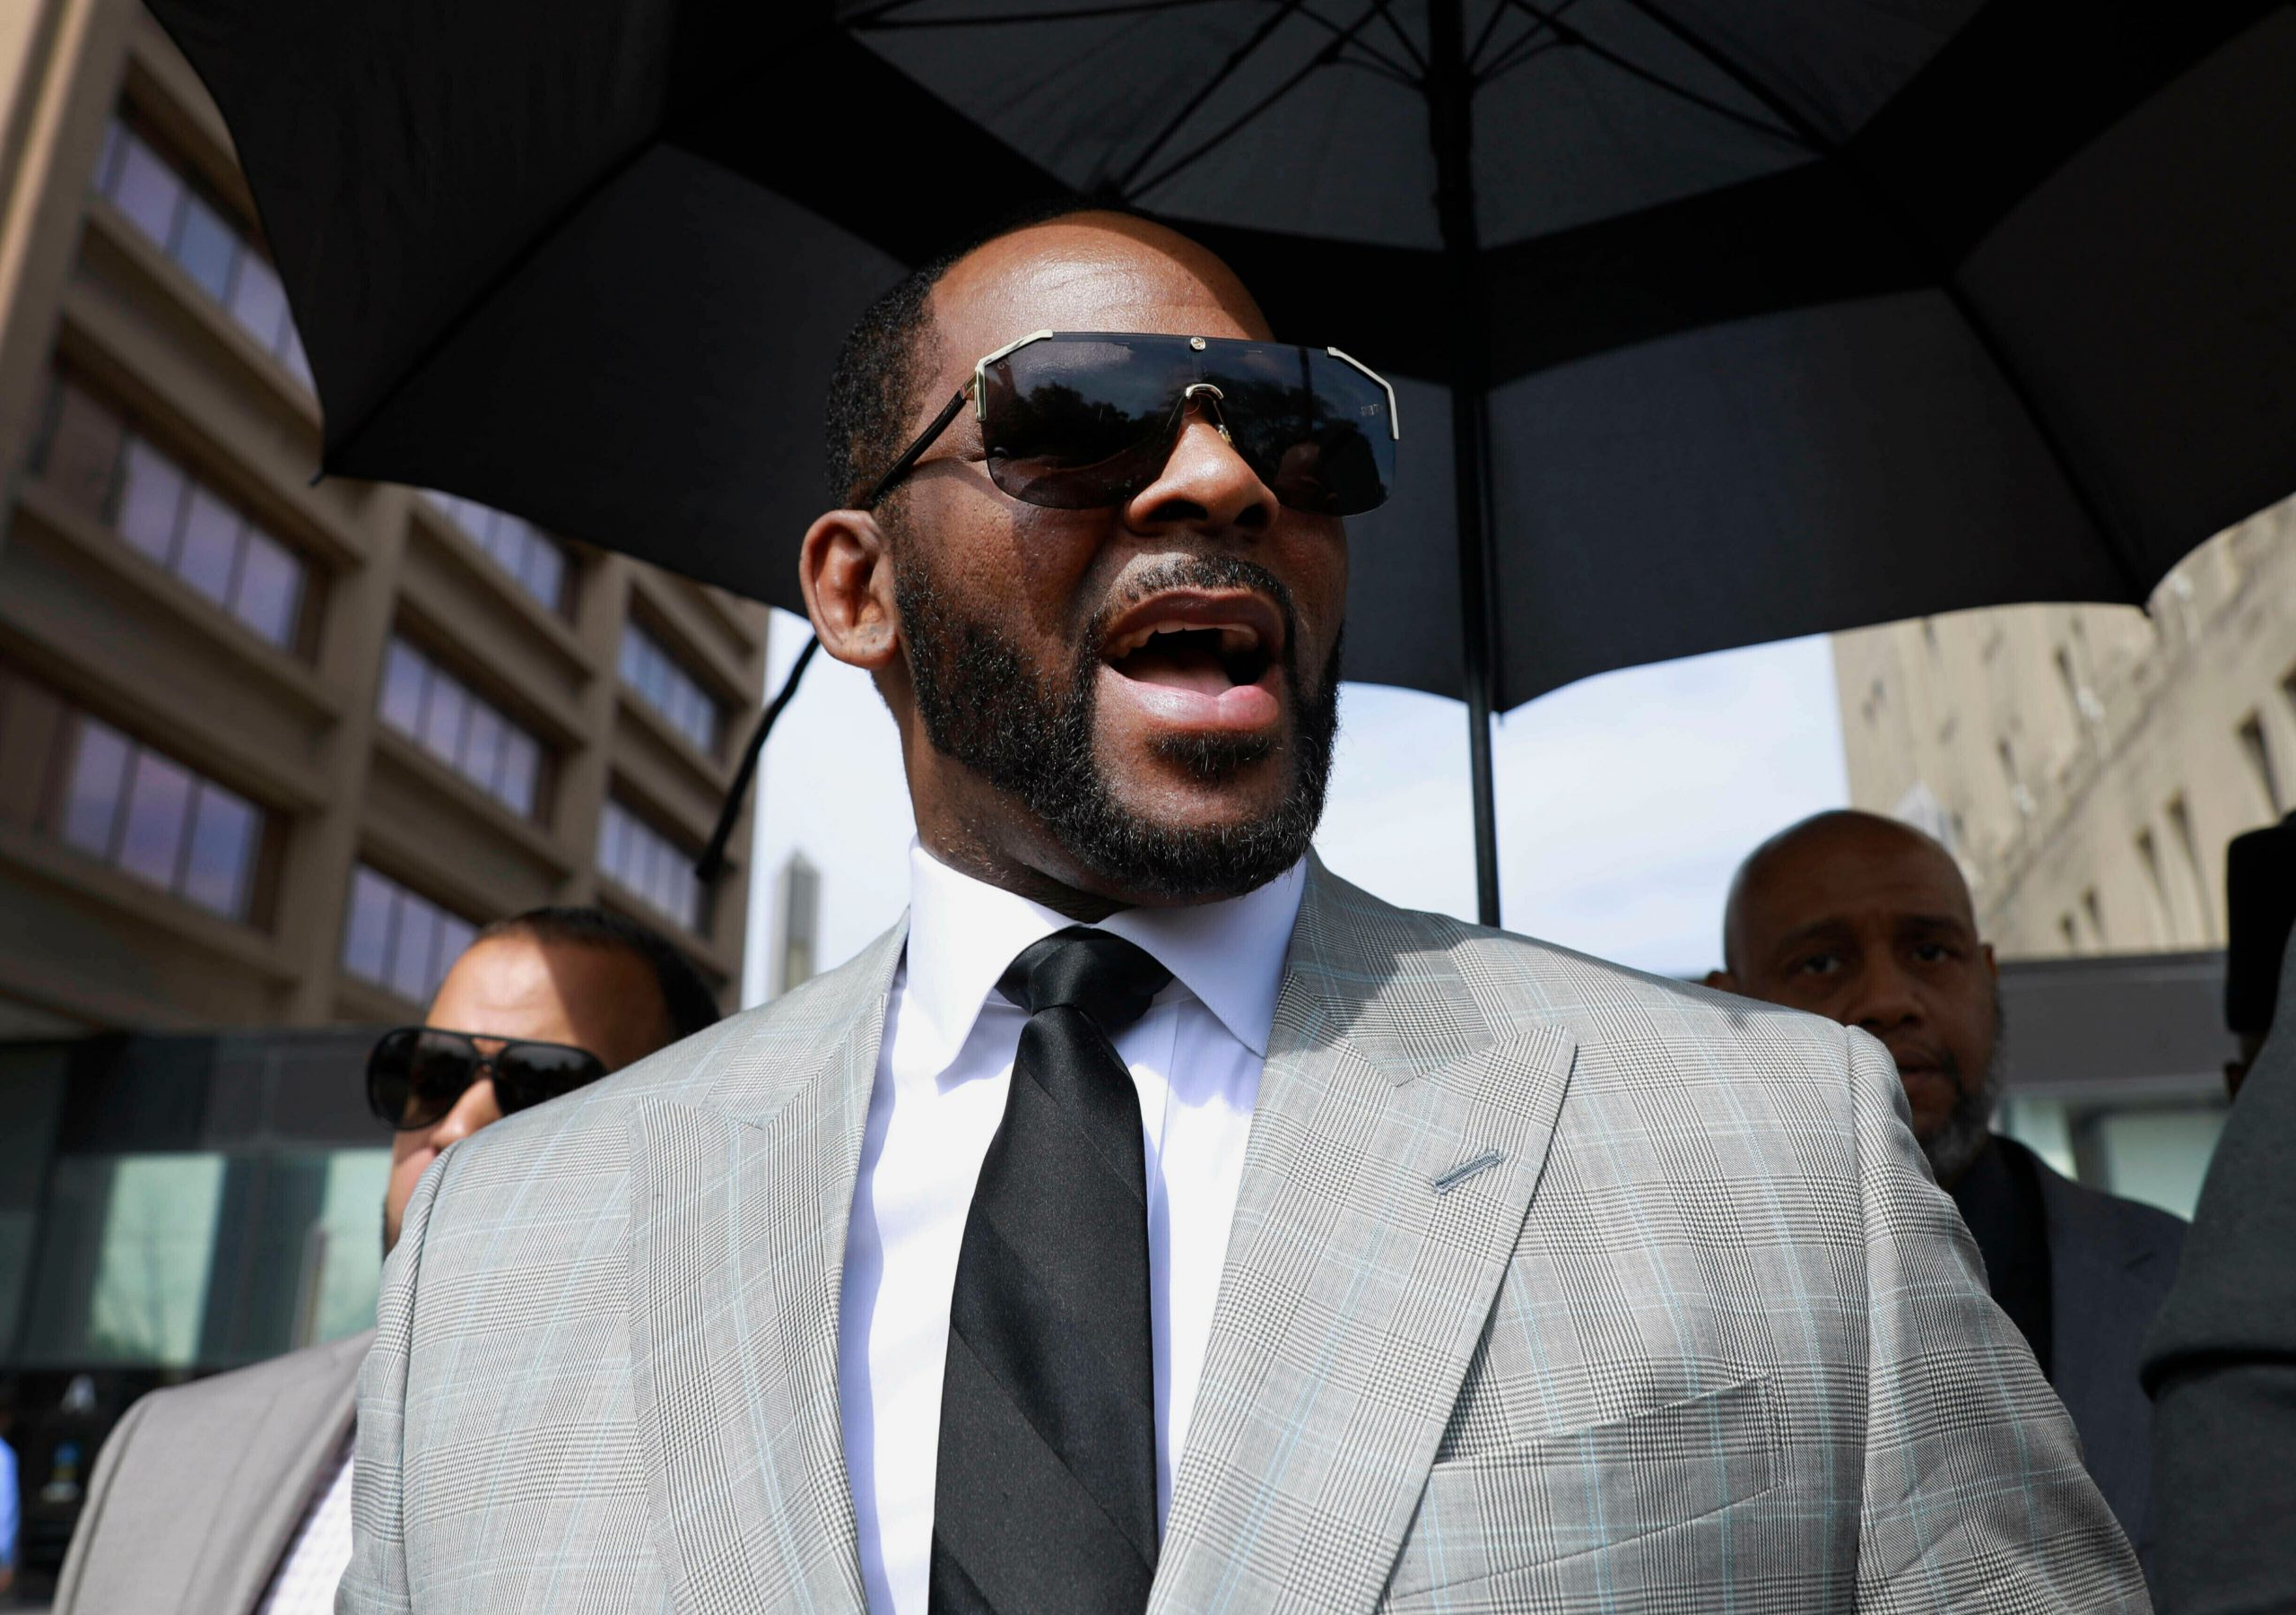 Jury in Chicago convicts R. Kelly on many counts, but not trial fixing